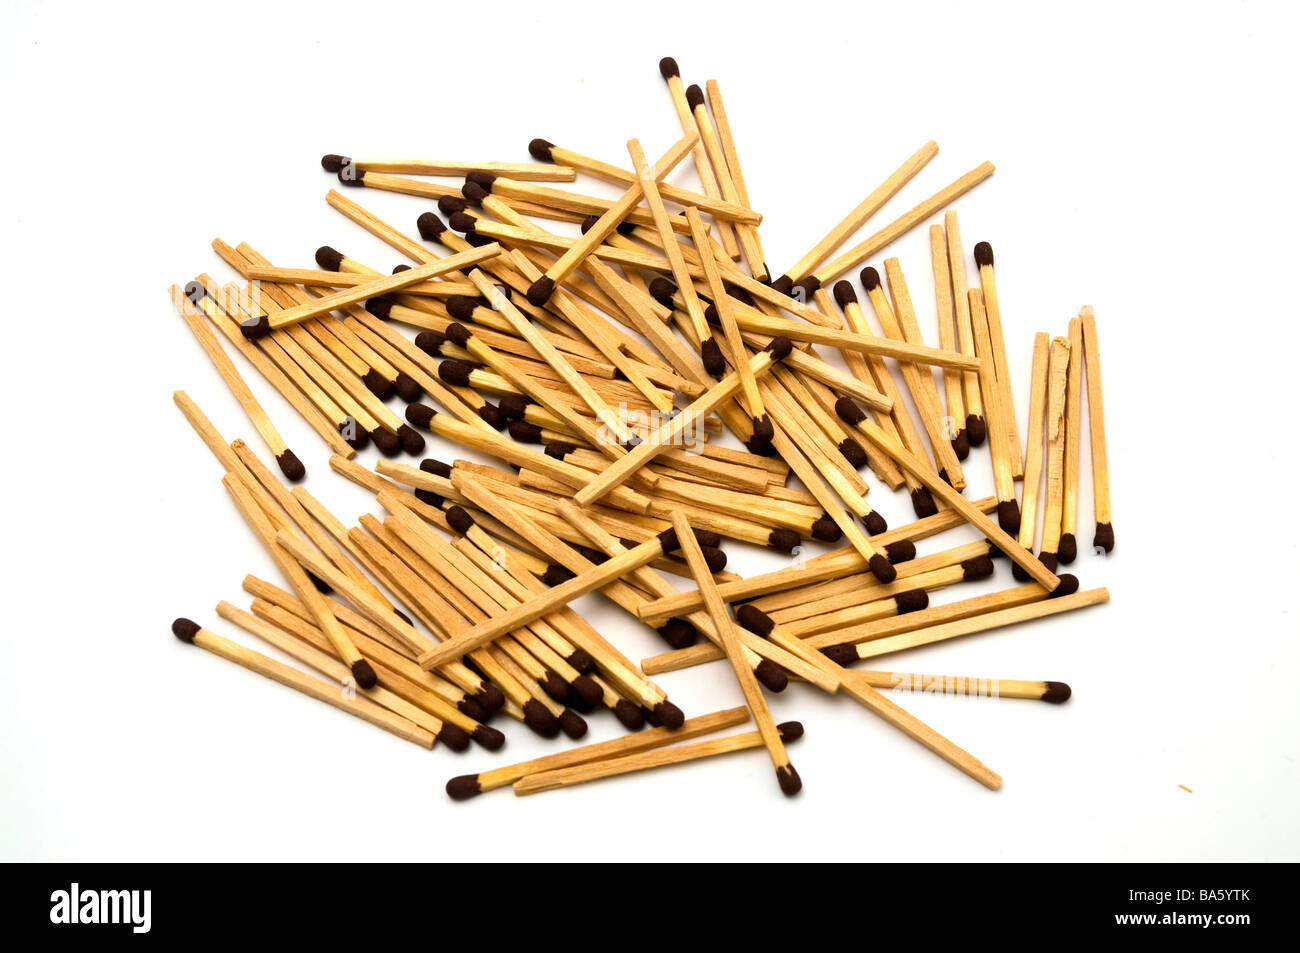 Group of matches on a white background Stock Photo